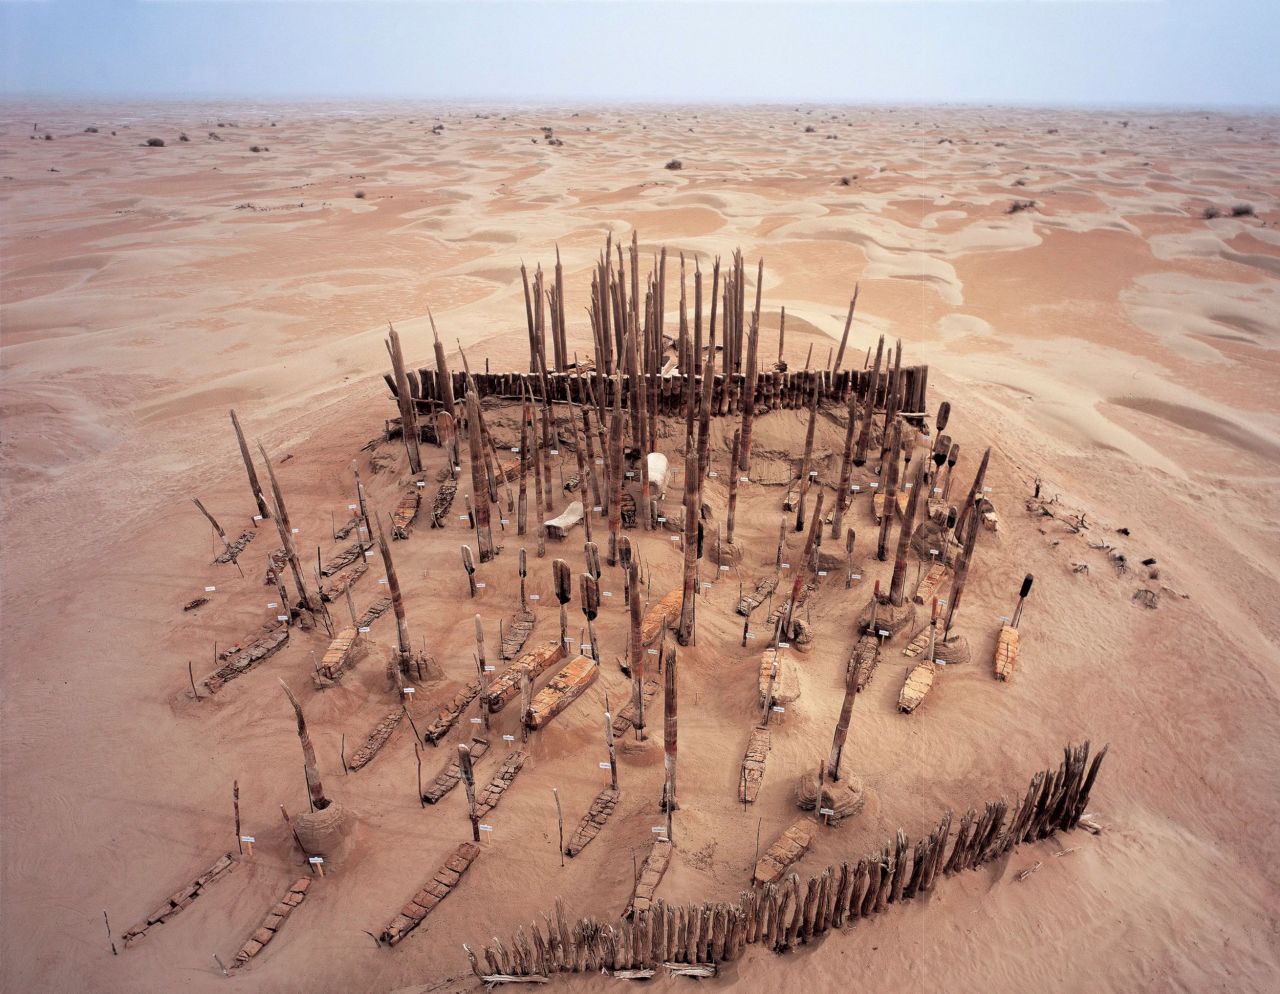 Hundreds of mummified bodies have been found across the Tarim Basin in Xinjiang, northwestern China, that date back to around 4,000 years ago. This is an aerial view of one site called Xiaohe Cemetery.